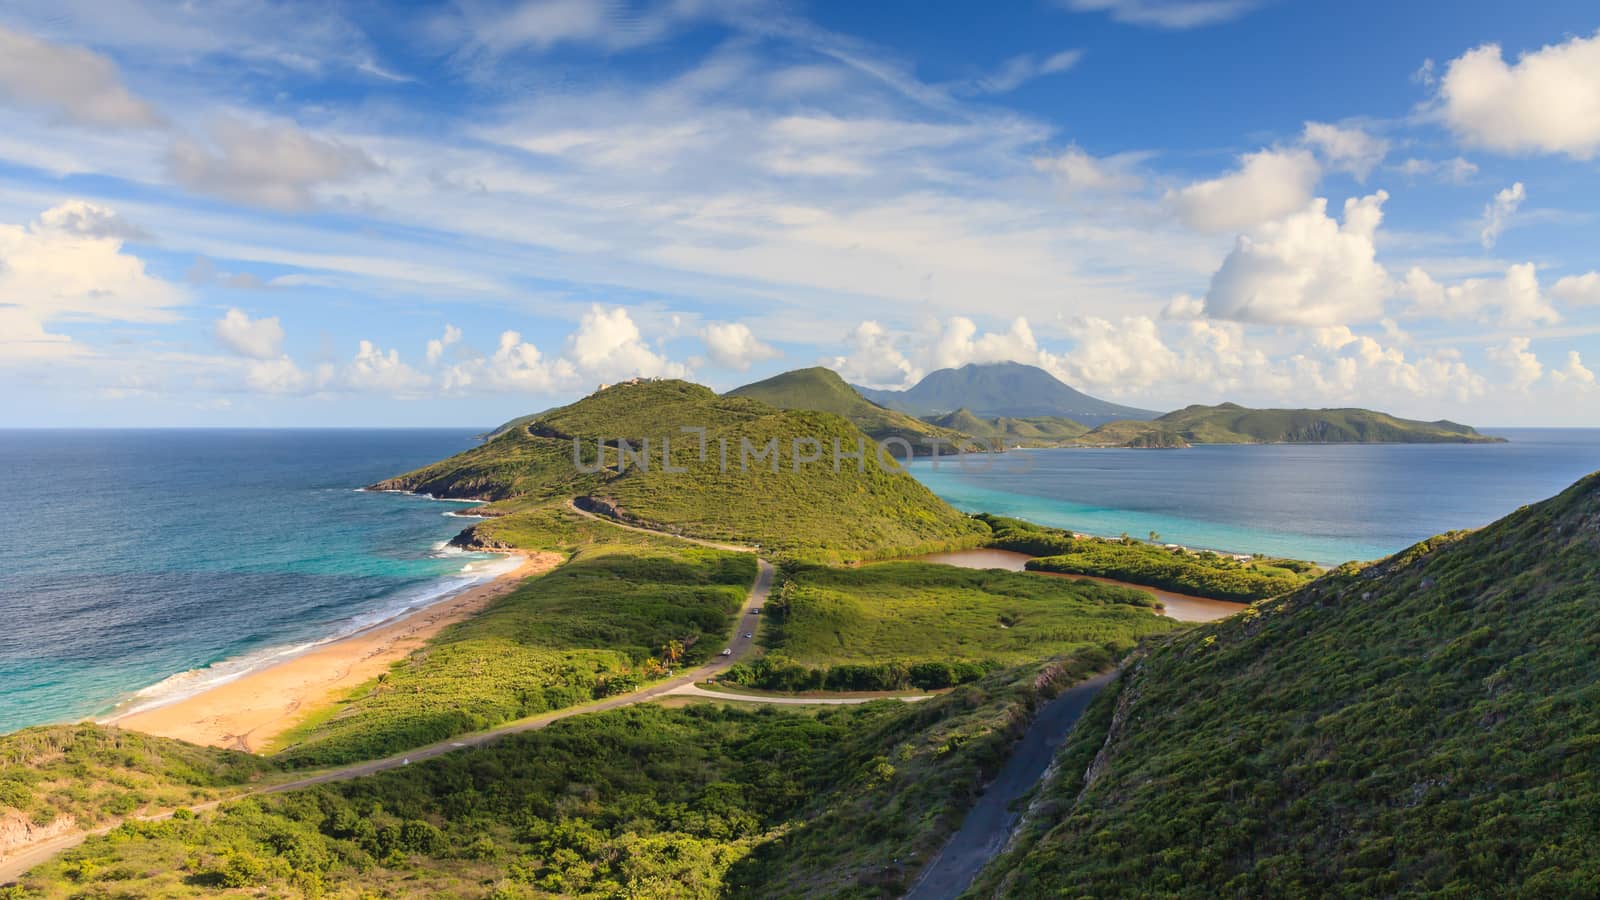 St Kitts Panorama by ATGImages